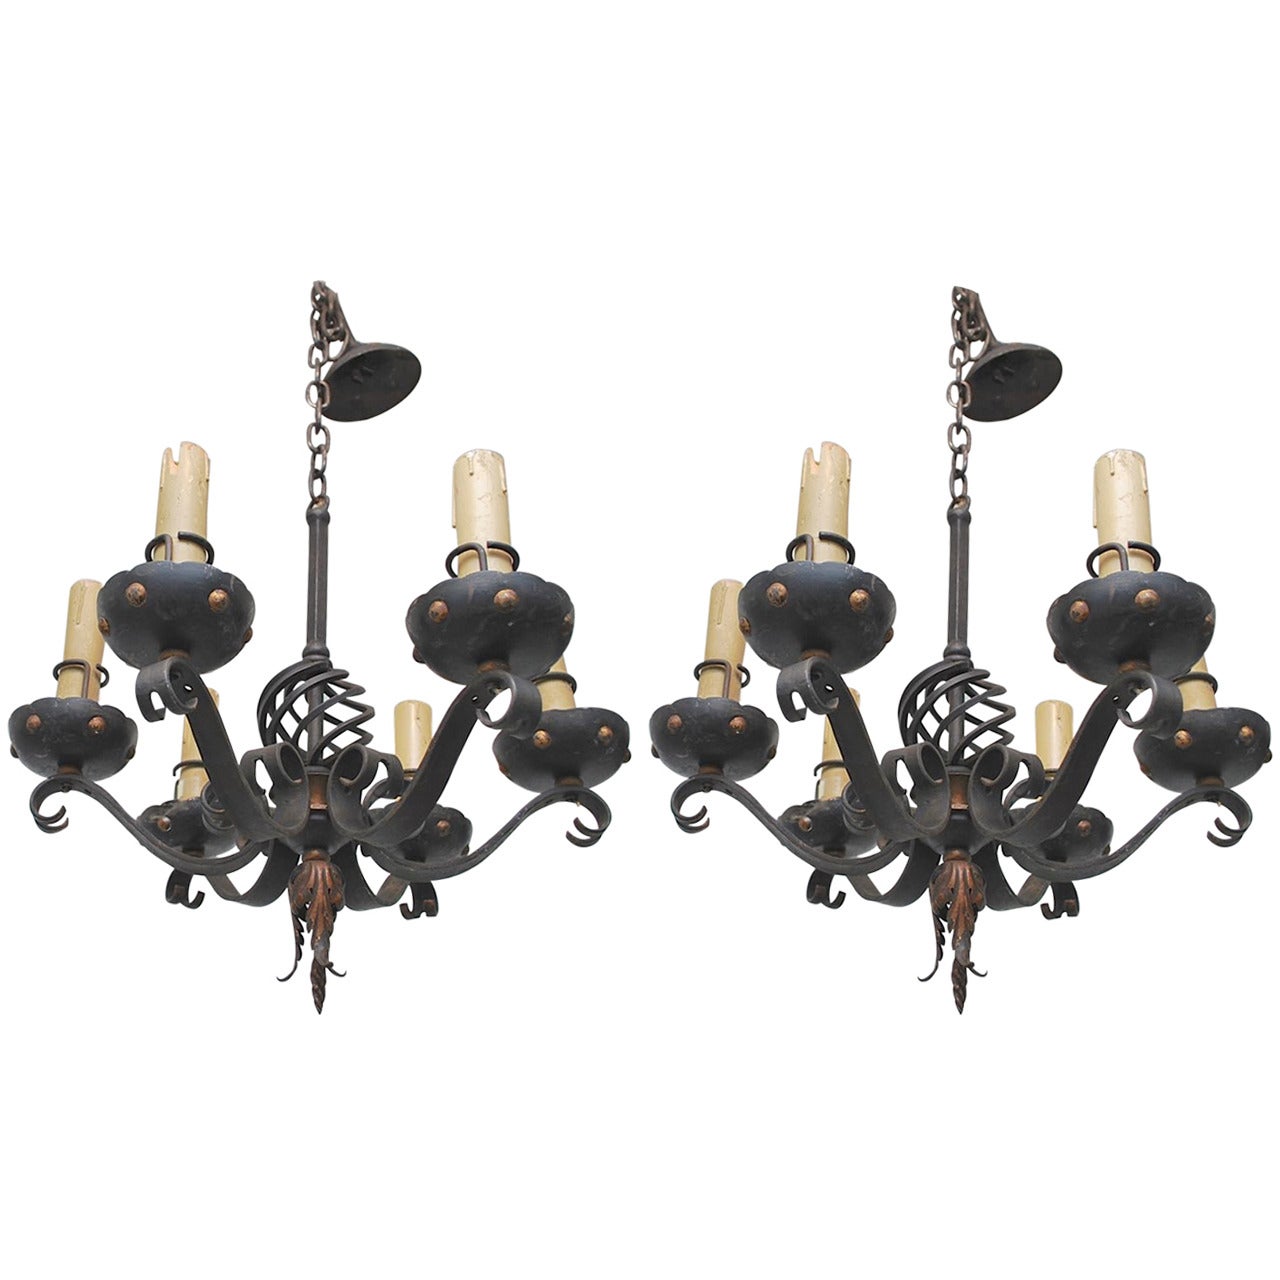 Pair of 1930 French Small Wrought Iron Chandeliers